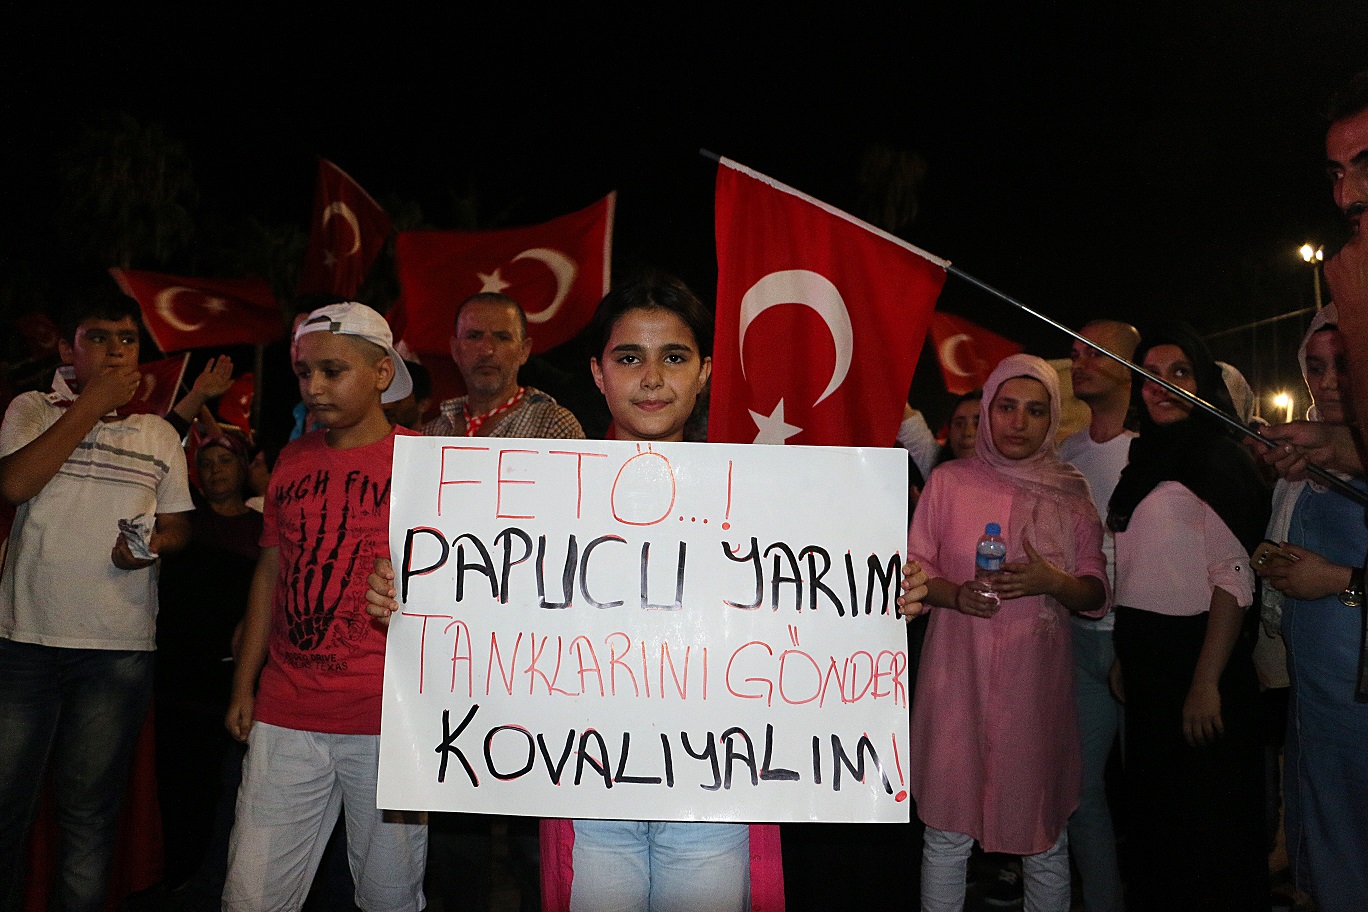 People attending the democracy watch showed their reaction to the coup attempt with the banners they prepared.